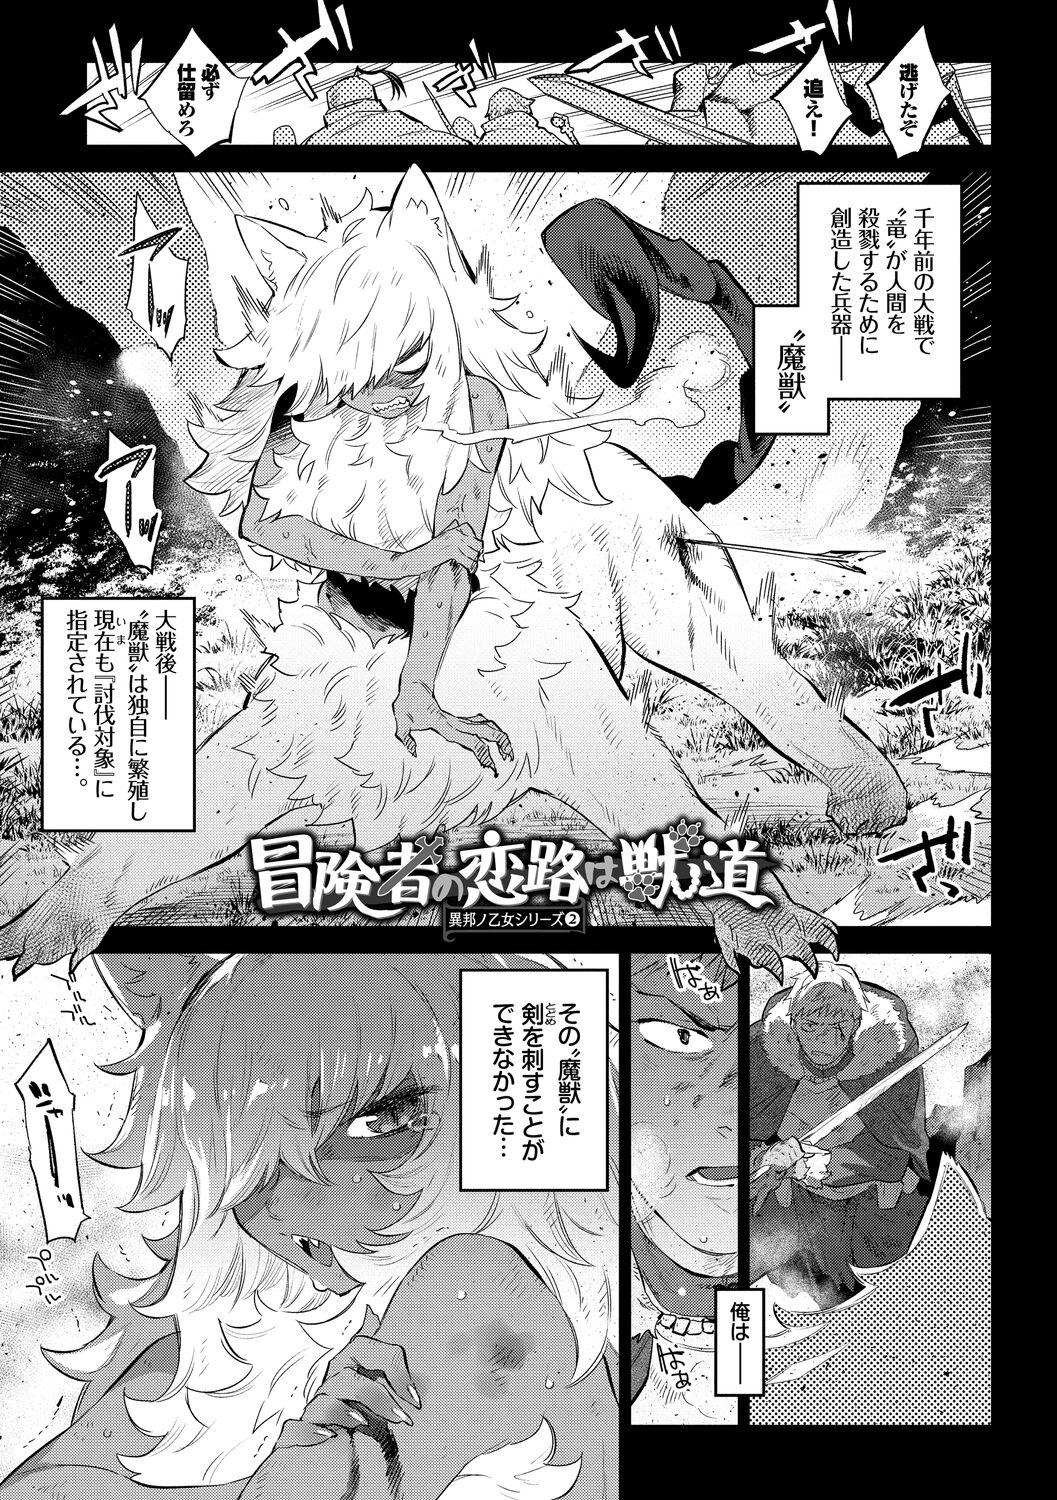 Ihou no Otome - Monster Girls in Another World 32